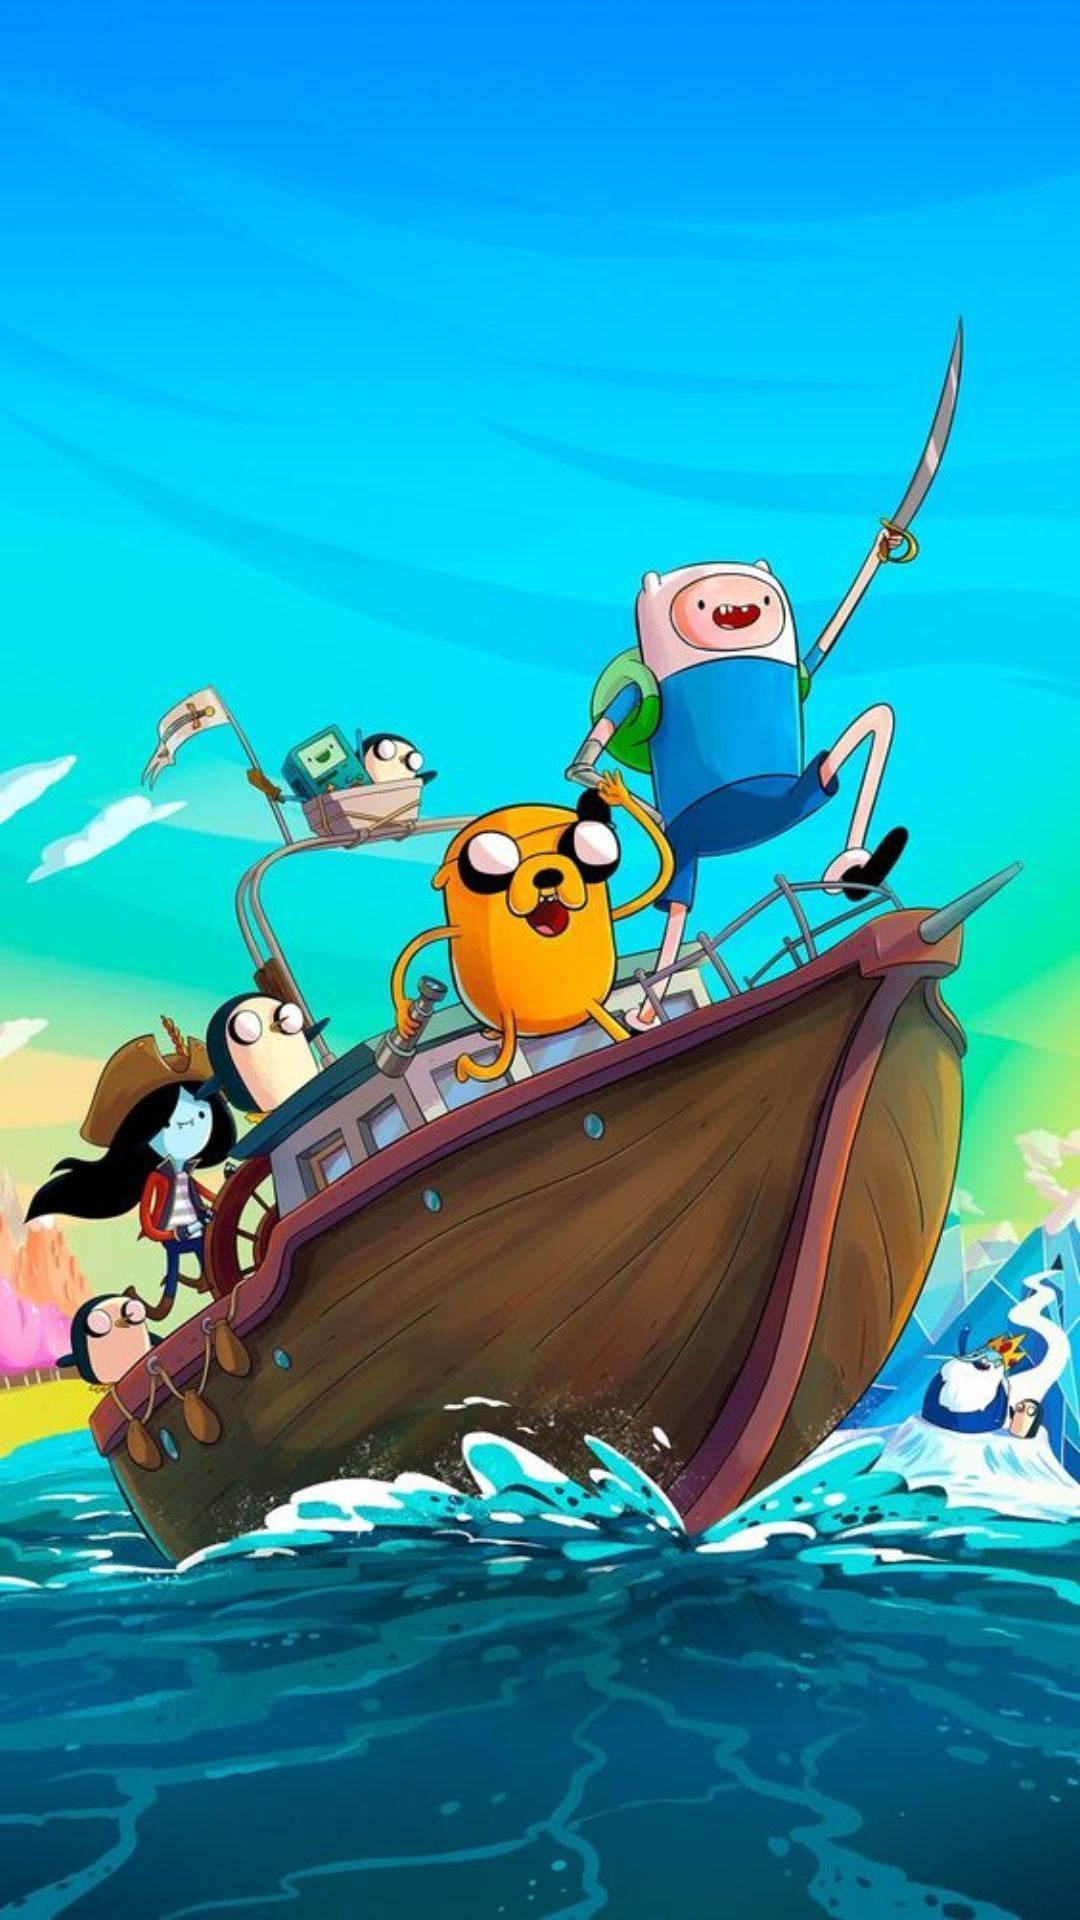 Adventure Time Characters iPhone Wallpaper with high-resolution 1080x1920 pixel. You can use this wallpaper for your iPhone 5, 6, 7, 8, X, XS, XR backgrounds, Mobile Screensaver, or iPad Lock Screen - Adventure Time